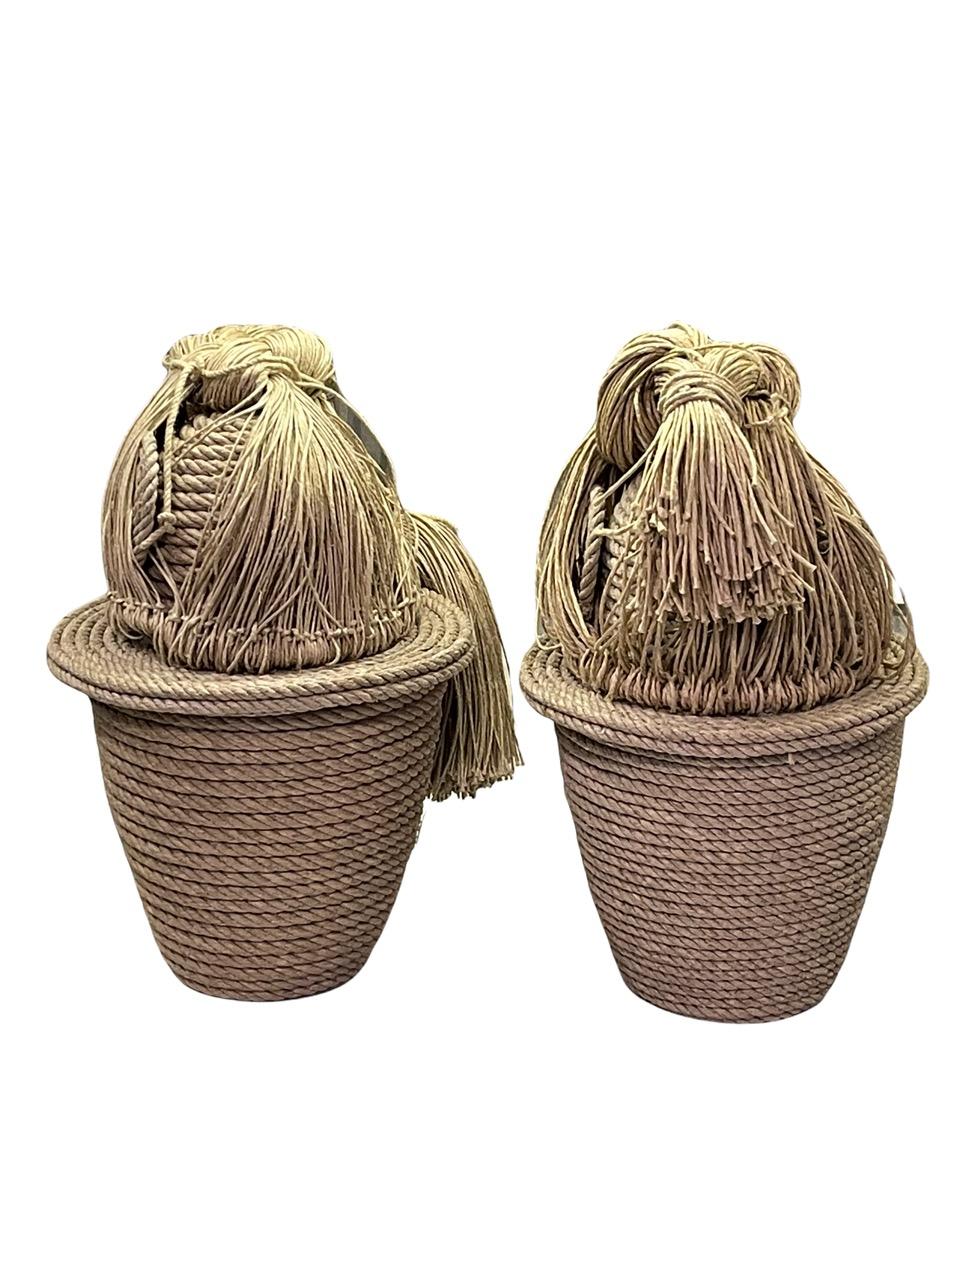 Pair of Contemporary 21st Century French Christian Astuguevieille Jute Rope Co For Sale 3